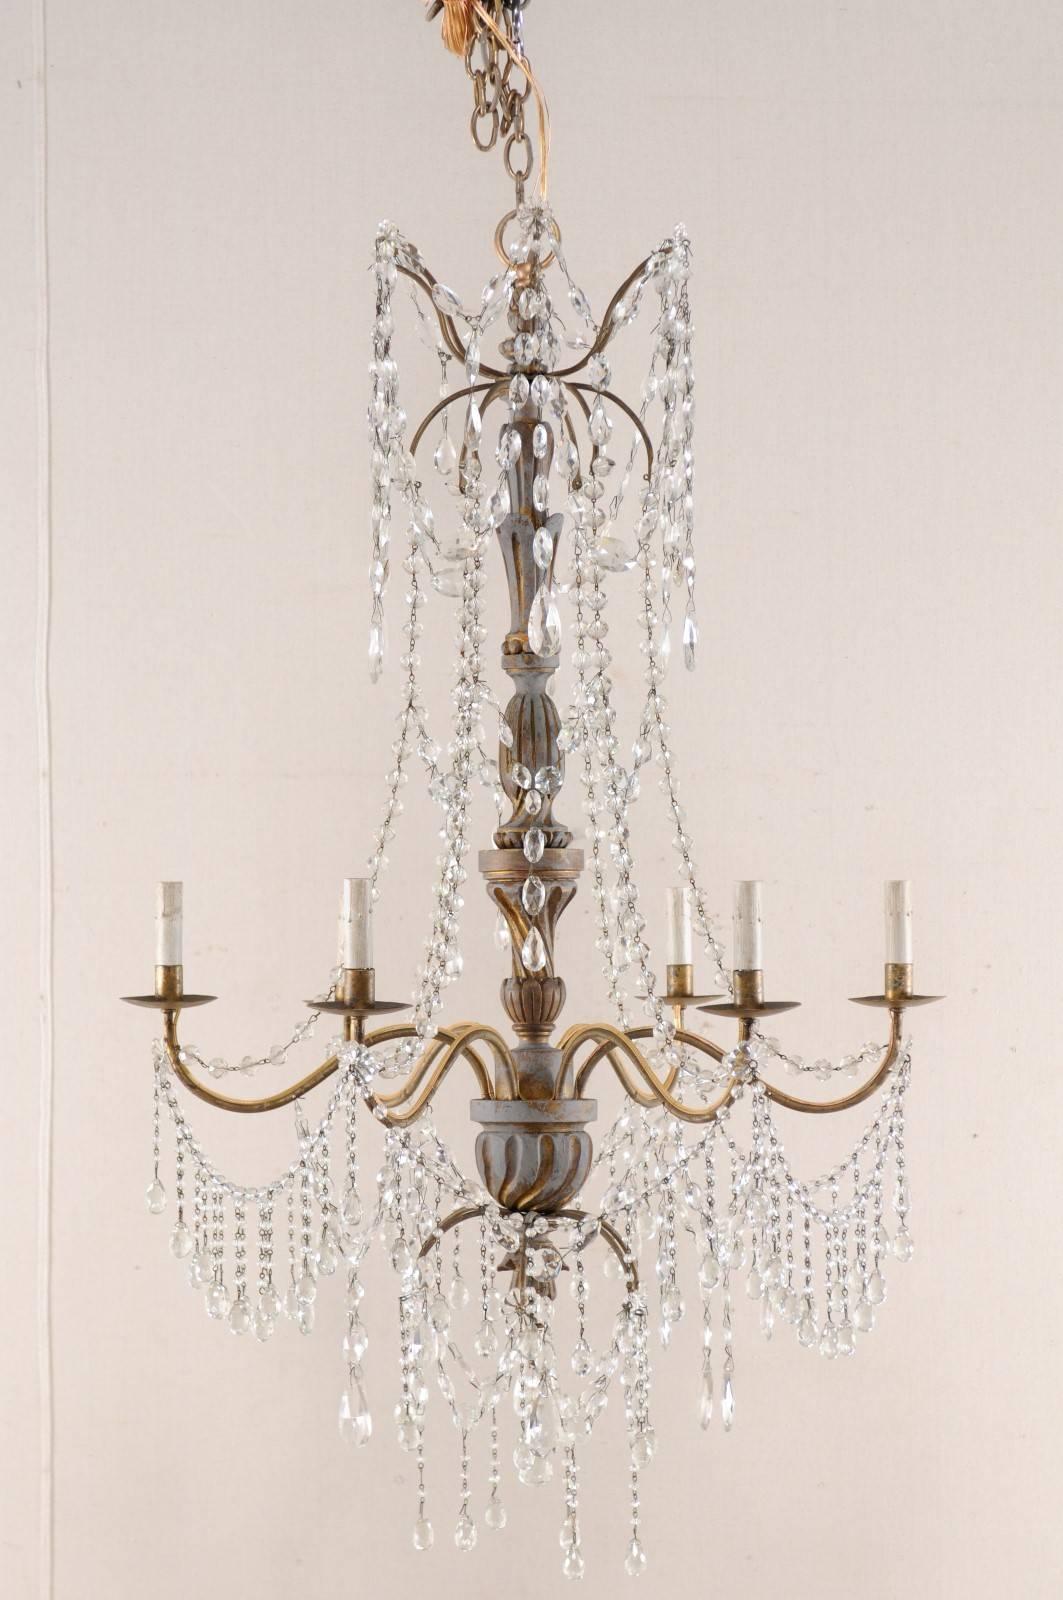 An antique Italian six-light crystal chandelier with gilt and painted wood central column. This Italian chandelier, from the early to mid-20th century, features an exquisitely carved wood central column with six metal S-shaped arms swooping outward,